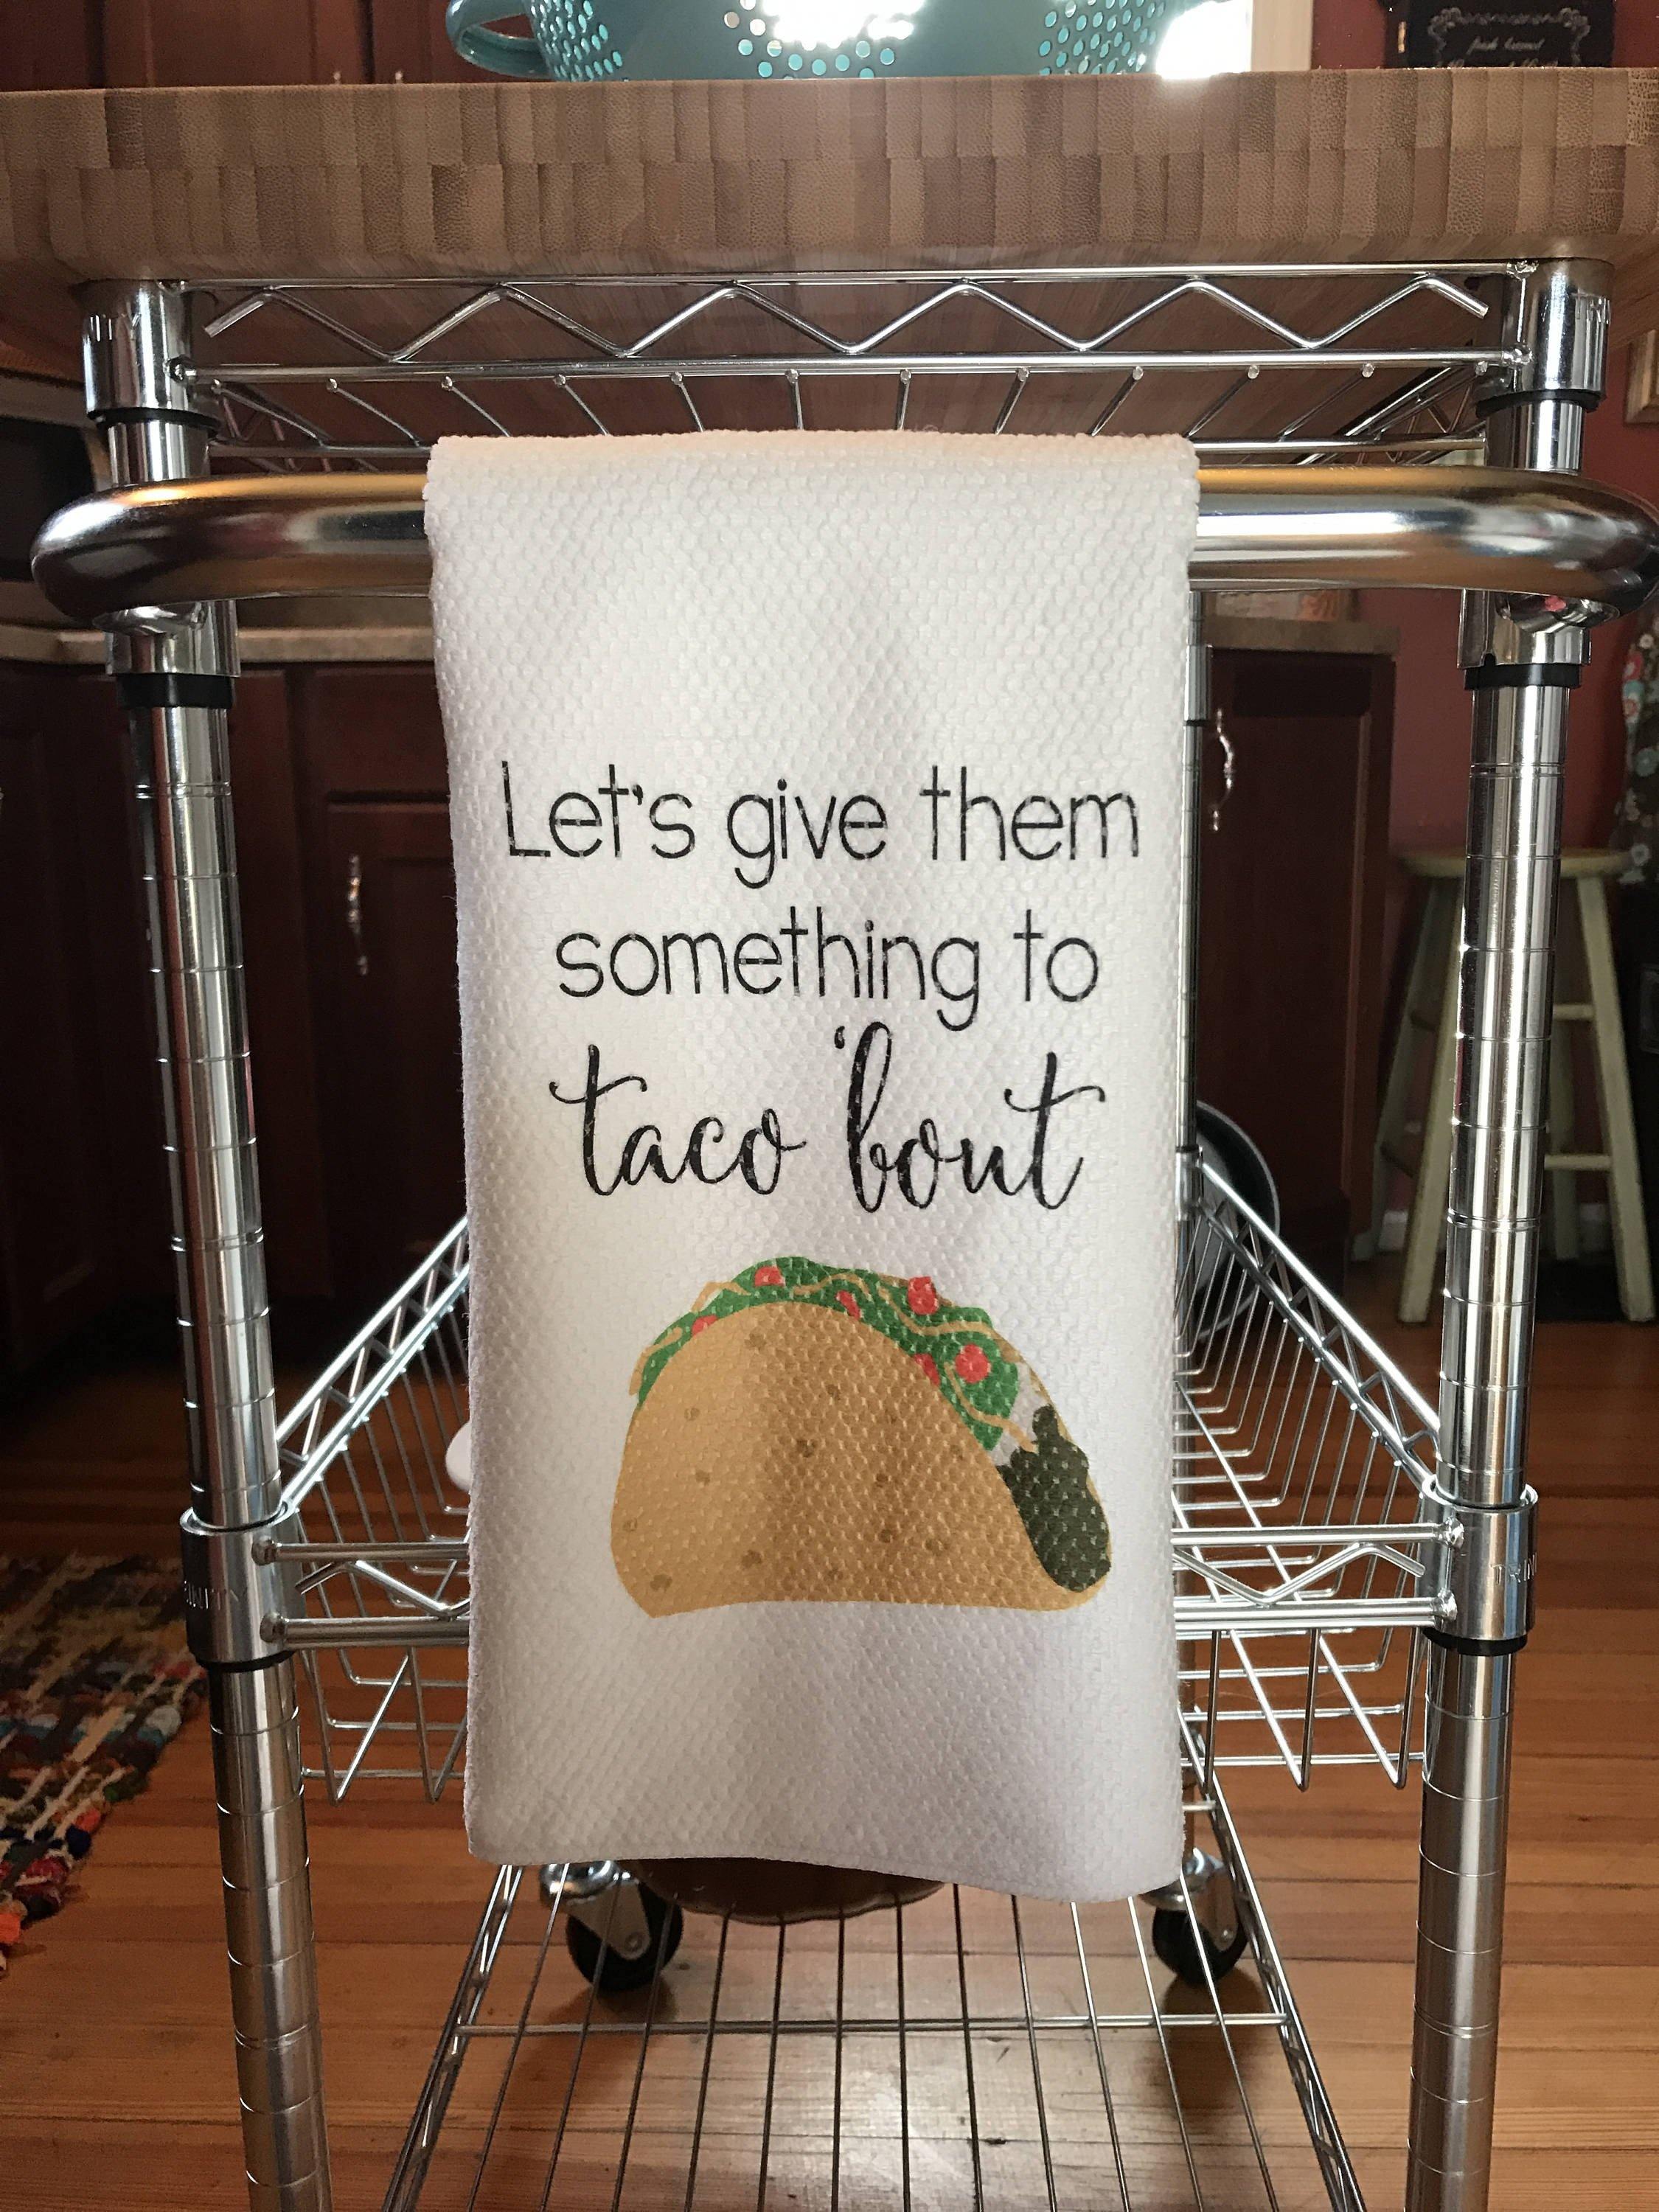 If I Have to Stir It It's Homemade Kitchen Towel: Funny Kitchen Accessories  – LuLu Grace